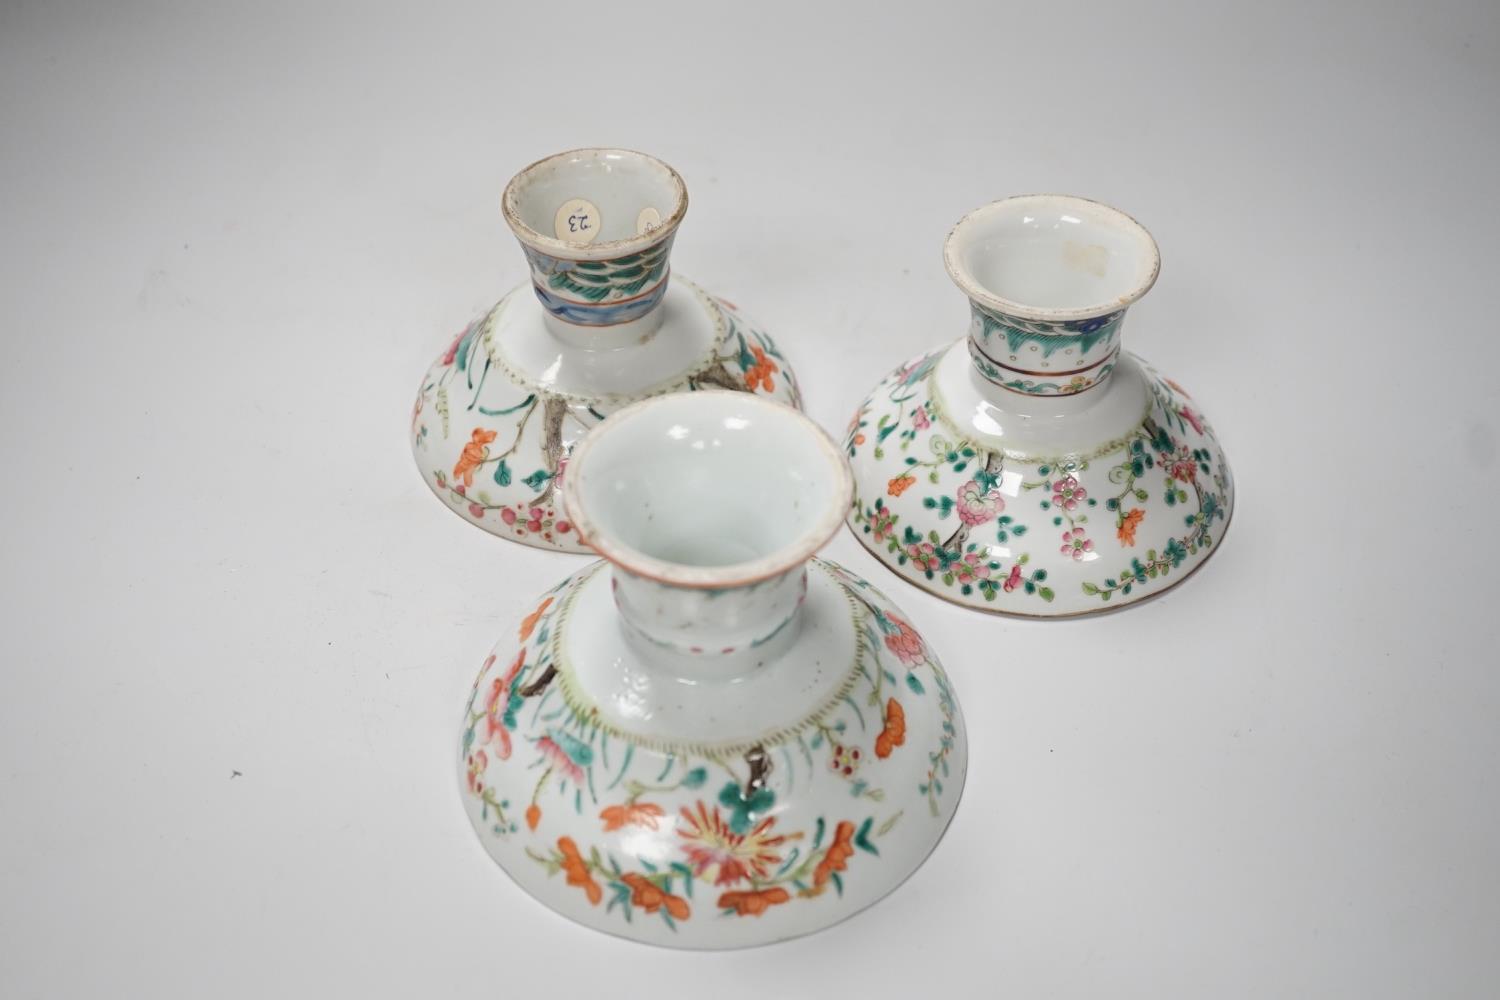 Three 19th century Chinese famille rose pedestal stem bowls, each painted with flowers and - Image 4 of 6